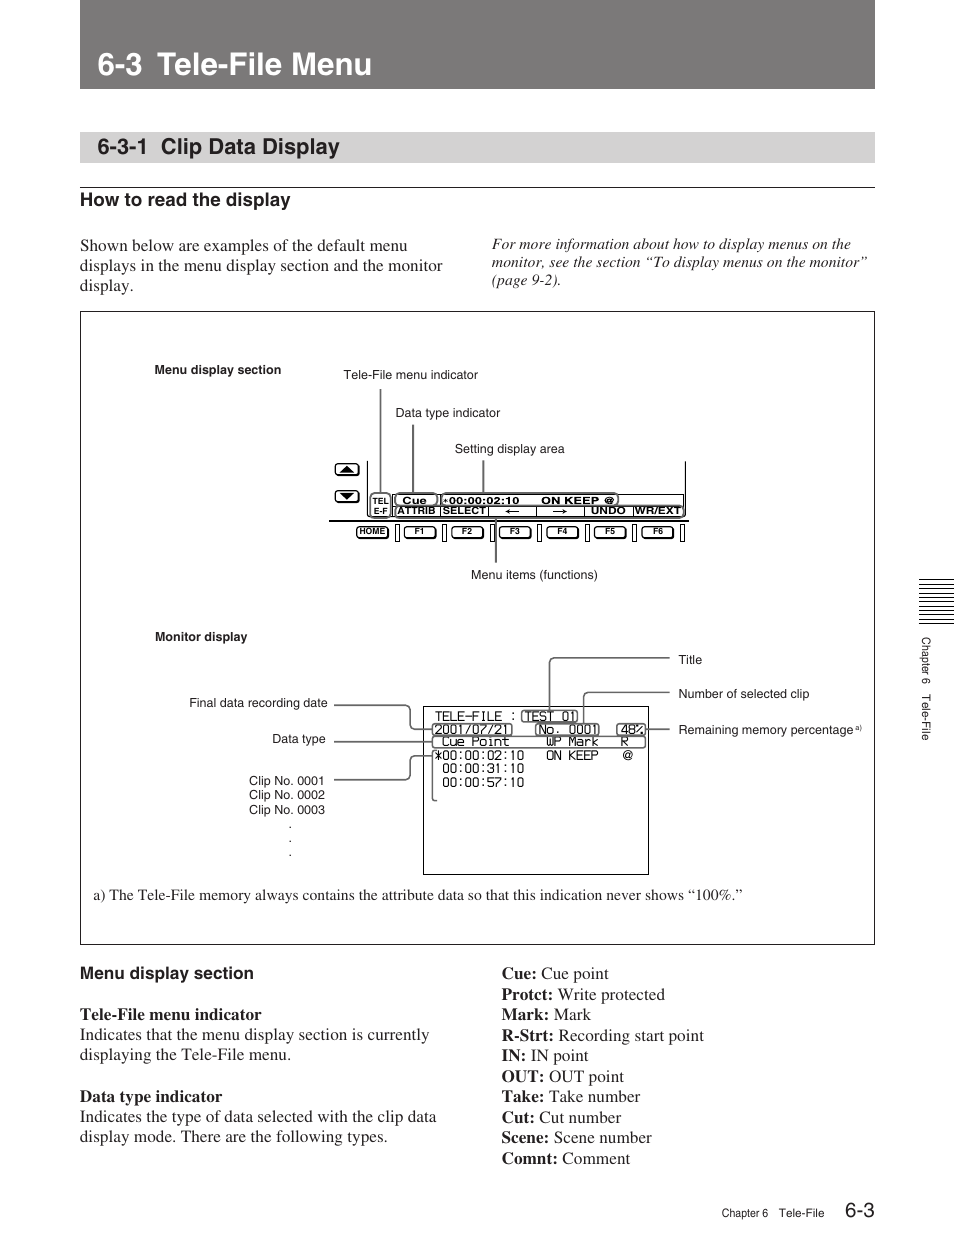 3 tele-file menu, 3-1 clip data display, How to read the display | Sony HDW-M2100 User Manual | Page 52 / 115